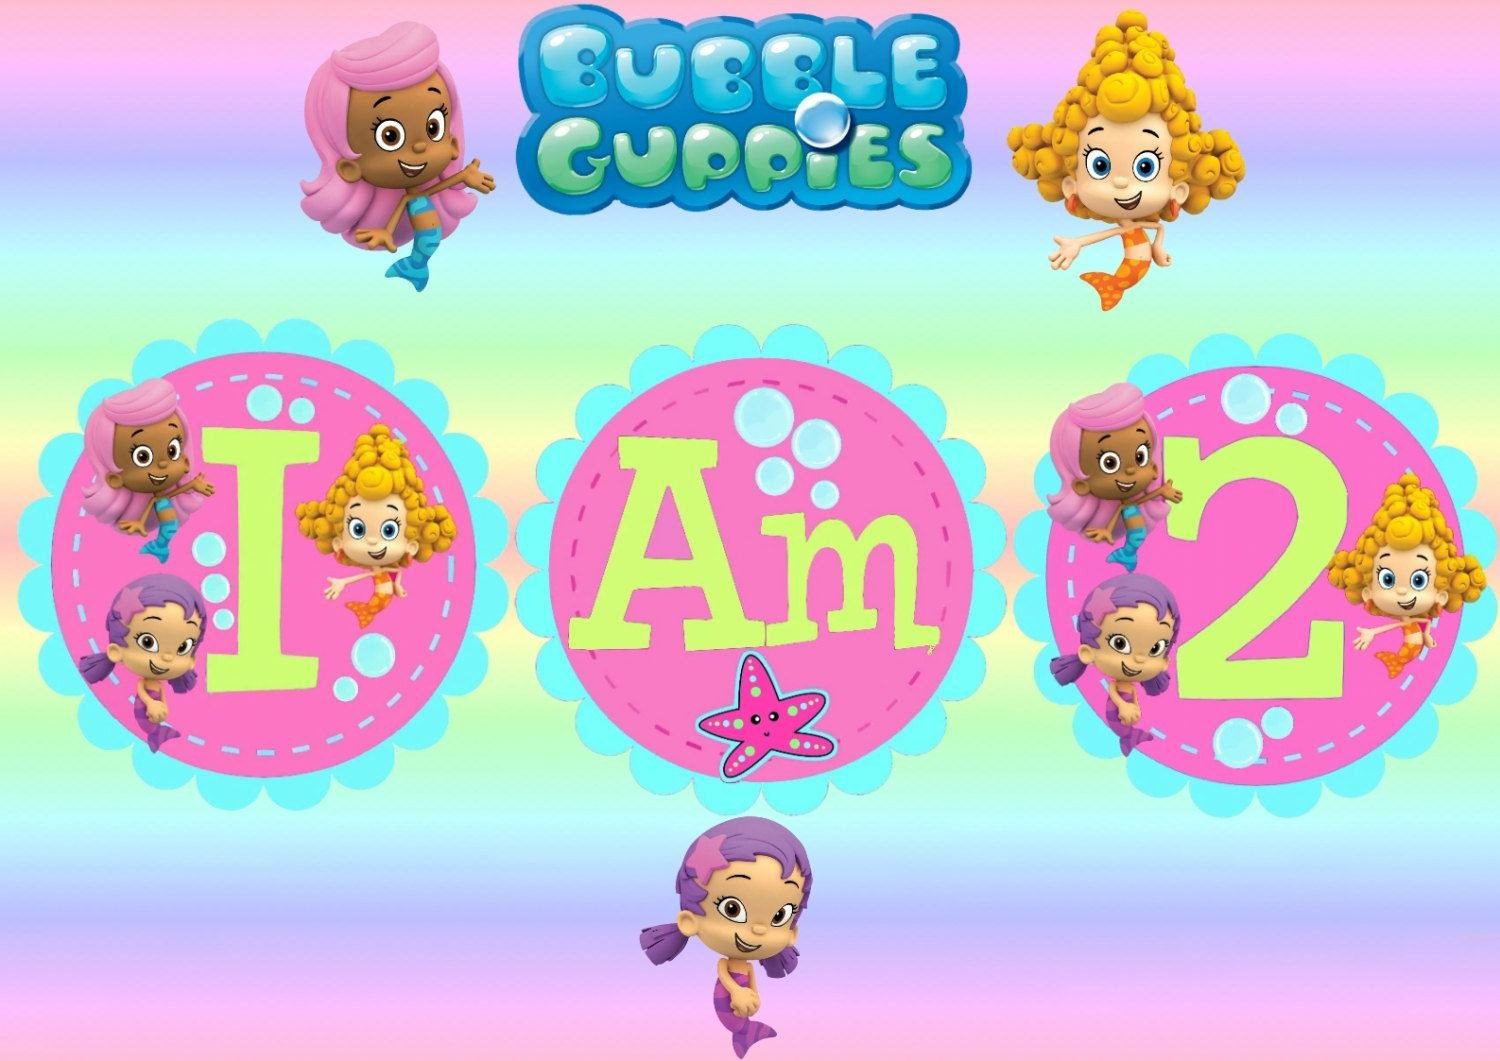 Free Invitations Template Bubble Guppies Invitations Templates Free regarding Bubble Guppies Birthday Banner Template